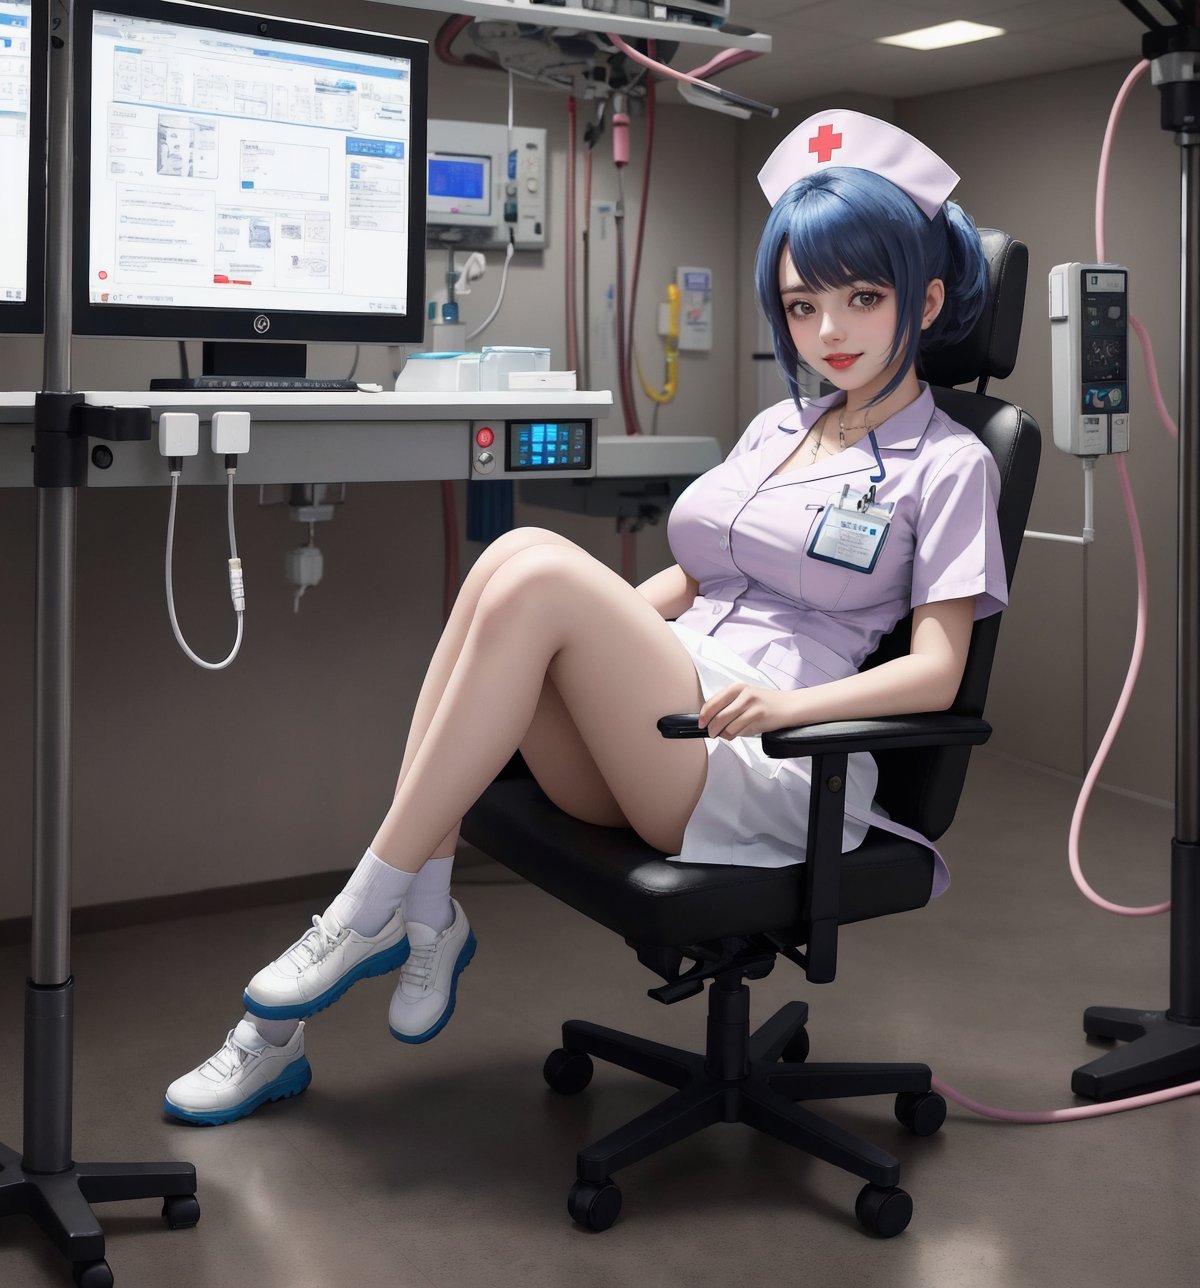 An ultra-detailed 16K masterpiece in sci-fi and adventure styles, rendered in ultra-high resolution with realistic detail. Darla, a beautiful 23-year-old woman, is dressed as a nurse in a hospital operating theatre. She wears a white uniform, a white jacket, a white skirt, white stockings and white shoes. Her short blue hair is styled in a Mohican cut, with gradient effects. She has red eyes, looking at the viewer while smiling, showing her teeth and wearing red lipstick. The image emphasises Darla's imposing figure and the technological elements of the operating theatre. The hospital machines, metal structures and control panels create a cold, sterile environment. The white lights illuminating the room add clinical detail to the scene. | Cold, metallic lighting effects create a tense, futuristic atmosphere, while detailed textures on the structures and uniform add realism to the image. | A tense, futuristic scene of a beautiful nurse in a hospital operating theatre, fusing elements of sci-fi and adventure. | (((The image reveals a full-body shot as Darla assumes a sensual pose, engagingly leaning against a structure within the scene in an exciting manner. She takes on a sensual pose as she interacts, boldly leaning on a structure, leaning back and boldly throwing herself onto the structure, reclining back in an exhilarating way.))). | ((((full-body shot)))), ((perfect pose)), ((perfect limbs, perfect fingers, better hands, perfect hands, hands)), ((perfect legs, perfect feet)), ((huge breasts)), ((perfect design)), ((perfect composition)), ((very detailed scene, very detailed background, perfect layout, correct imperfections)), Enhance, Ultra details++, More Detail, poakl